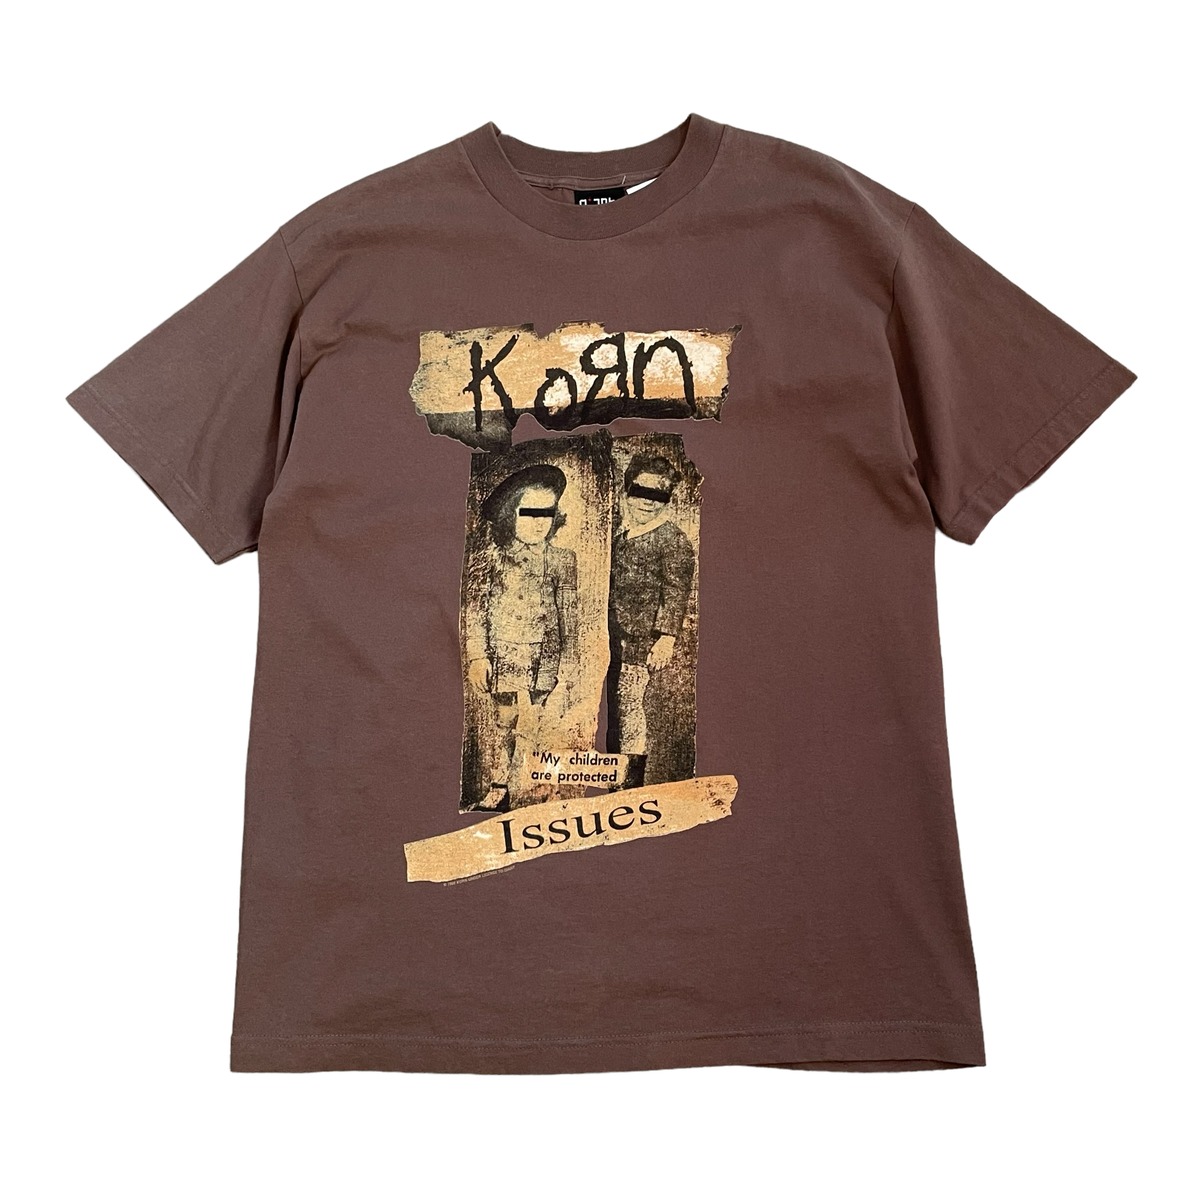 VINTAGE ヴィンテージ 90s 1999 Korn Issues Giant Body コーン イ